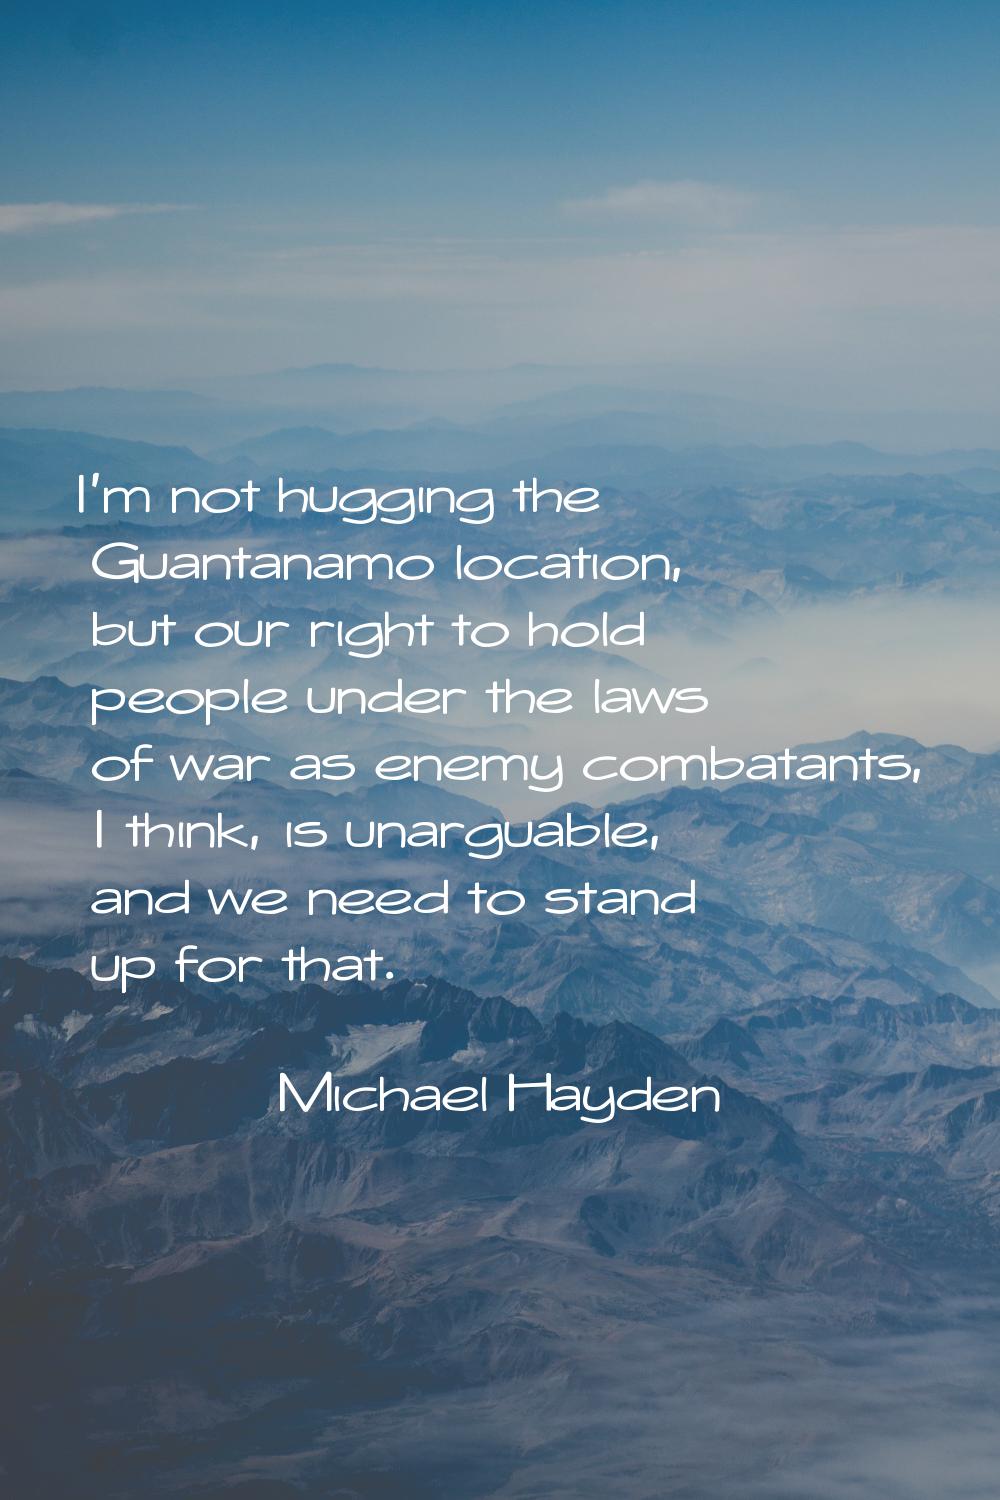 I'm not hugging the Guantanamo location, but our right to hold people under the laws of war as enem